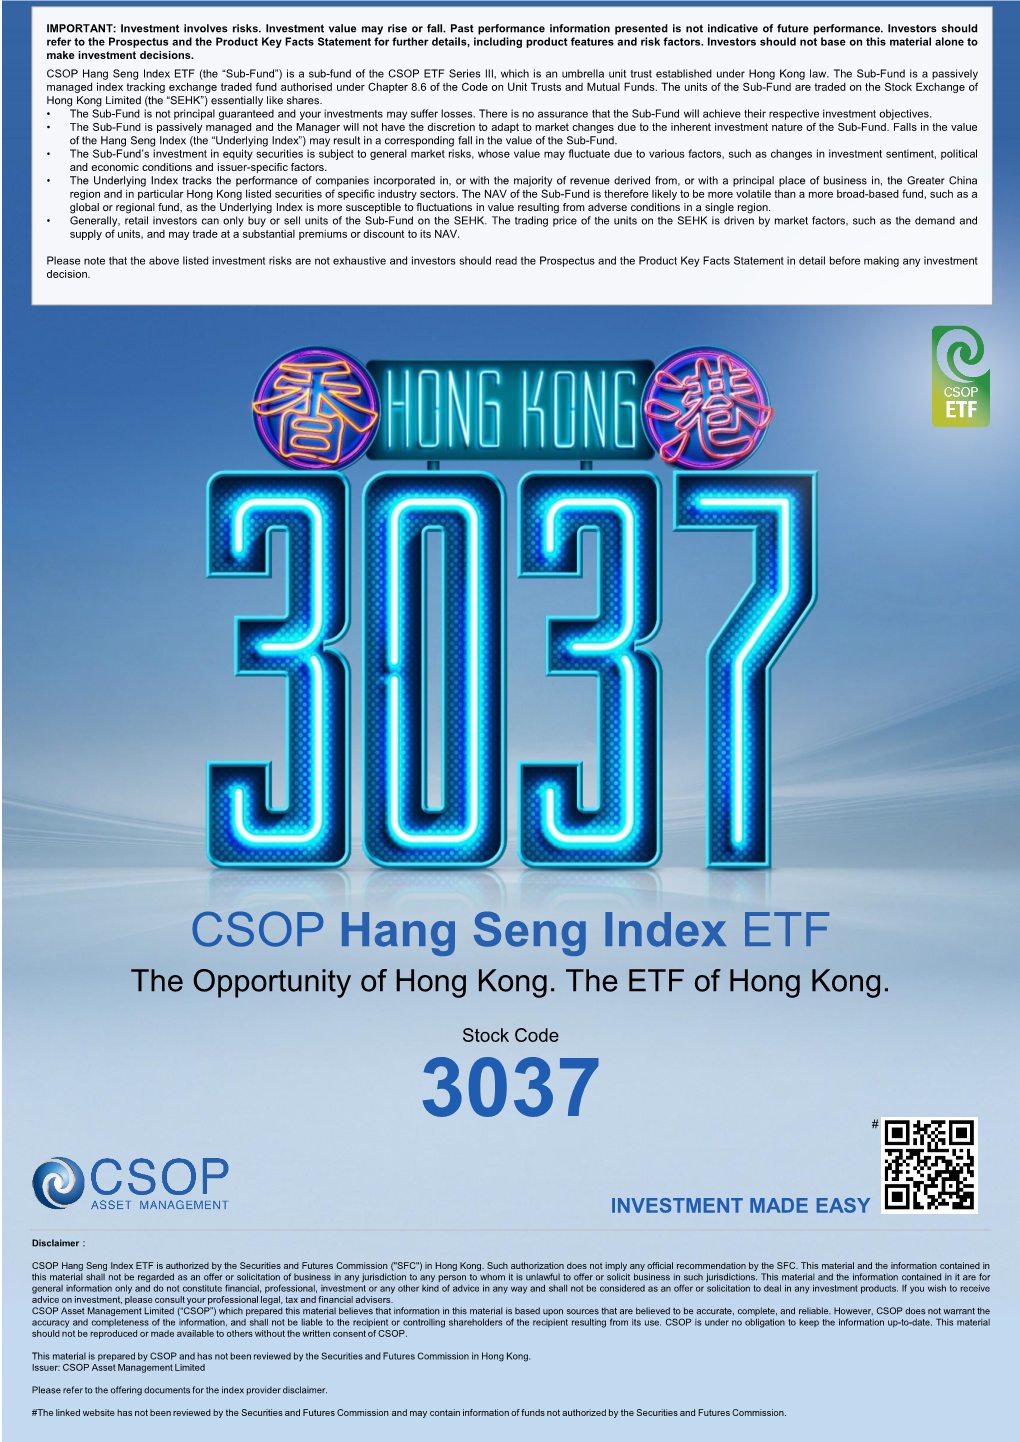 CSOP Hang Seng Index ETF (The “Sub-Fund”) Is a Sub-Fund of the CSOP ETF Series III, Which Is an Umbrella Unit Trust Established Under Hong Kong Law